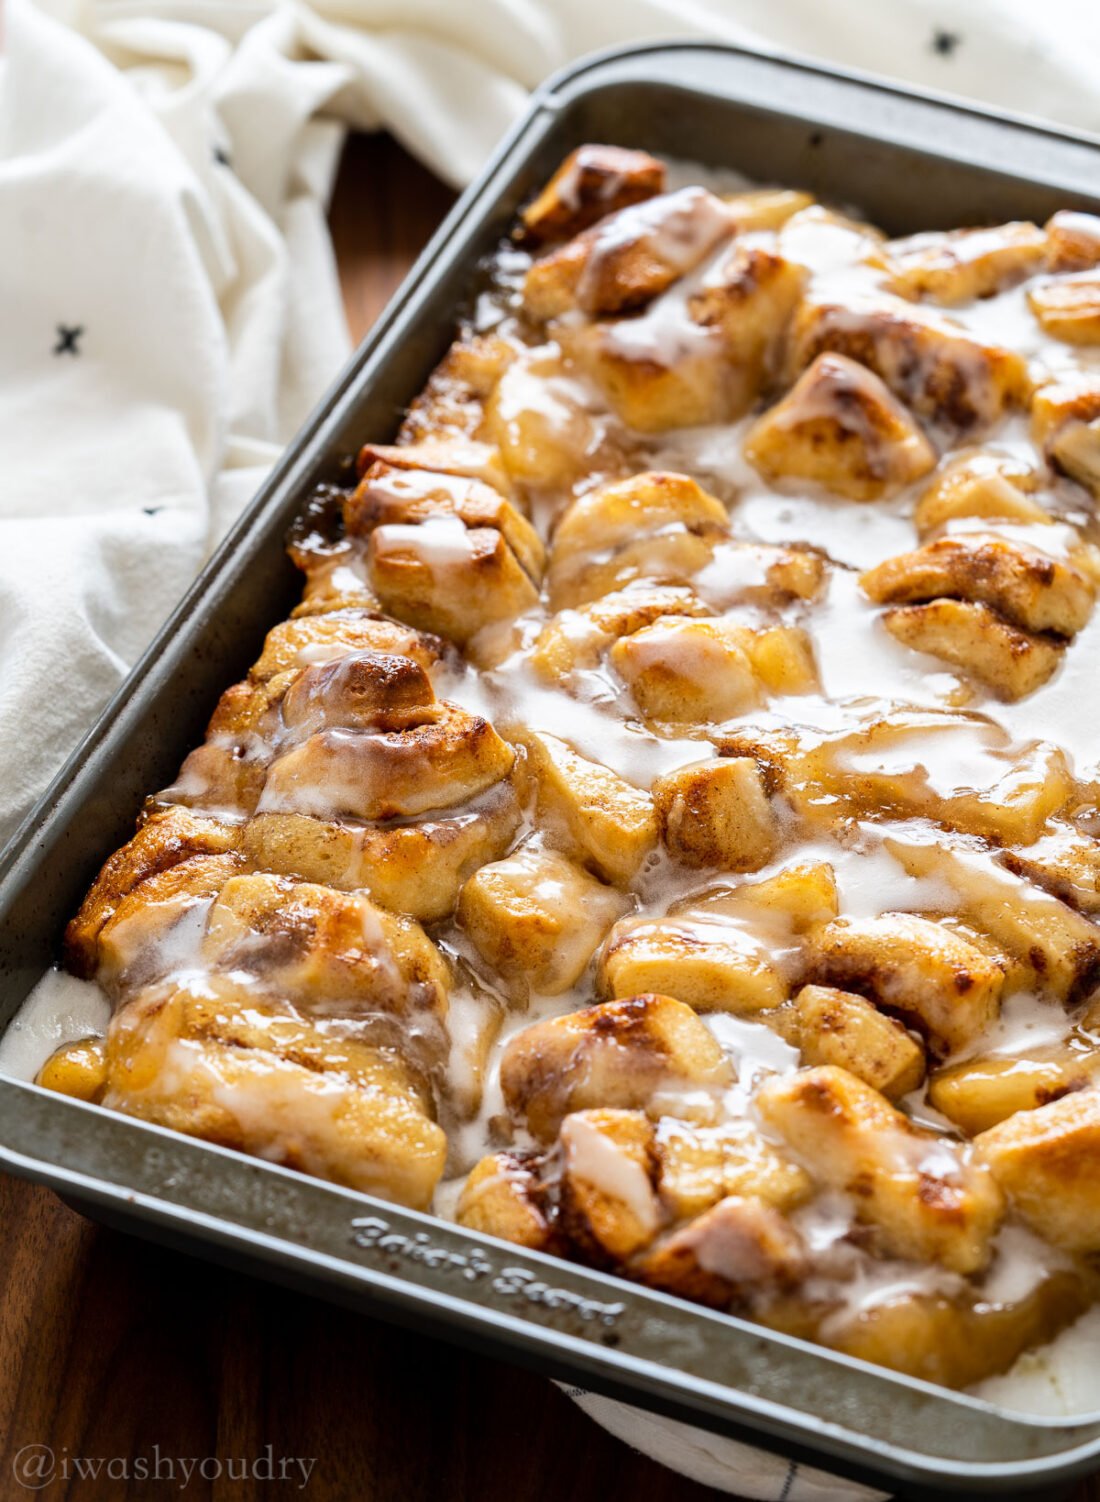 Baking dish with cinnamon rolls and apples with white frosting on top.